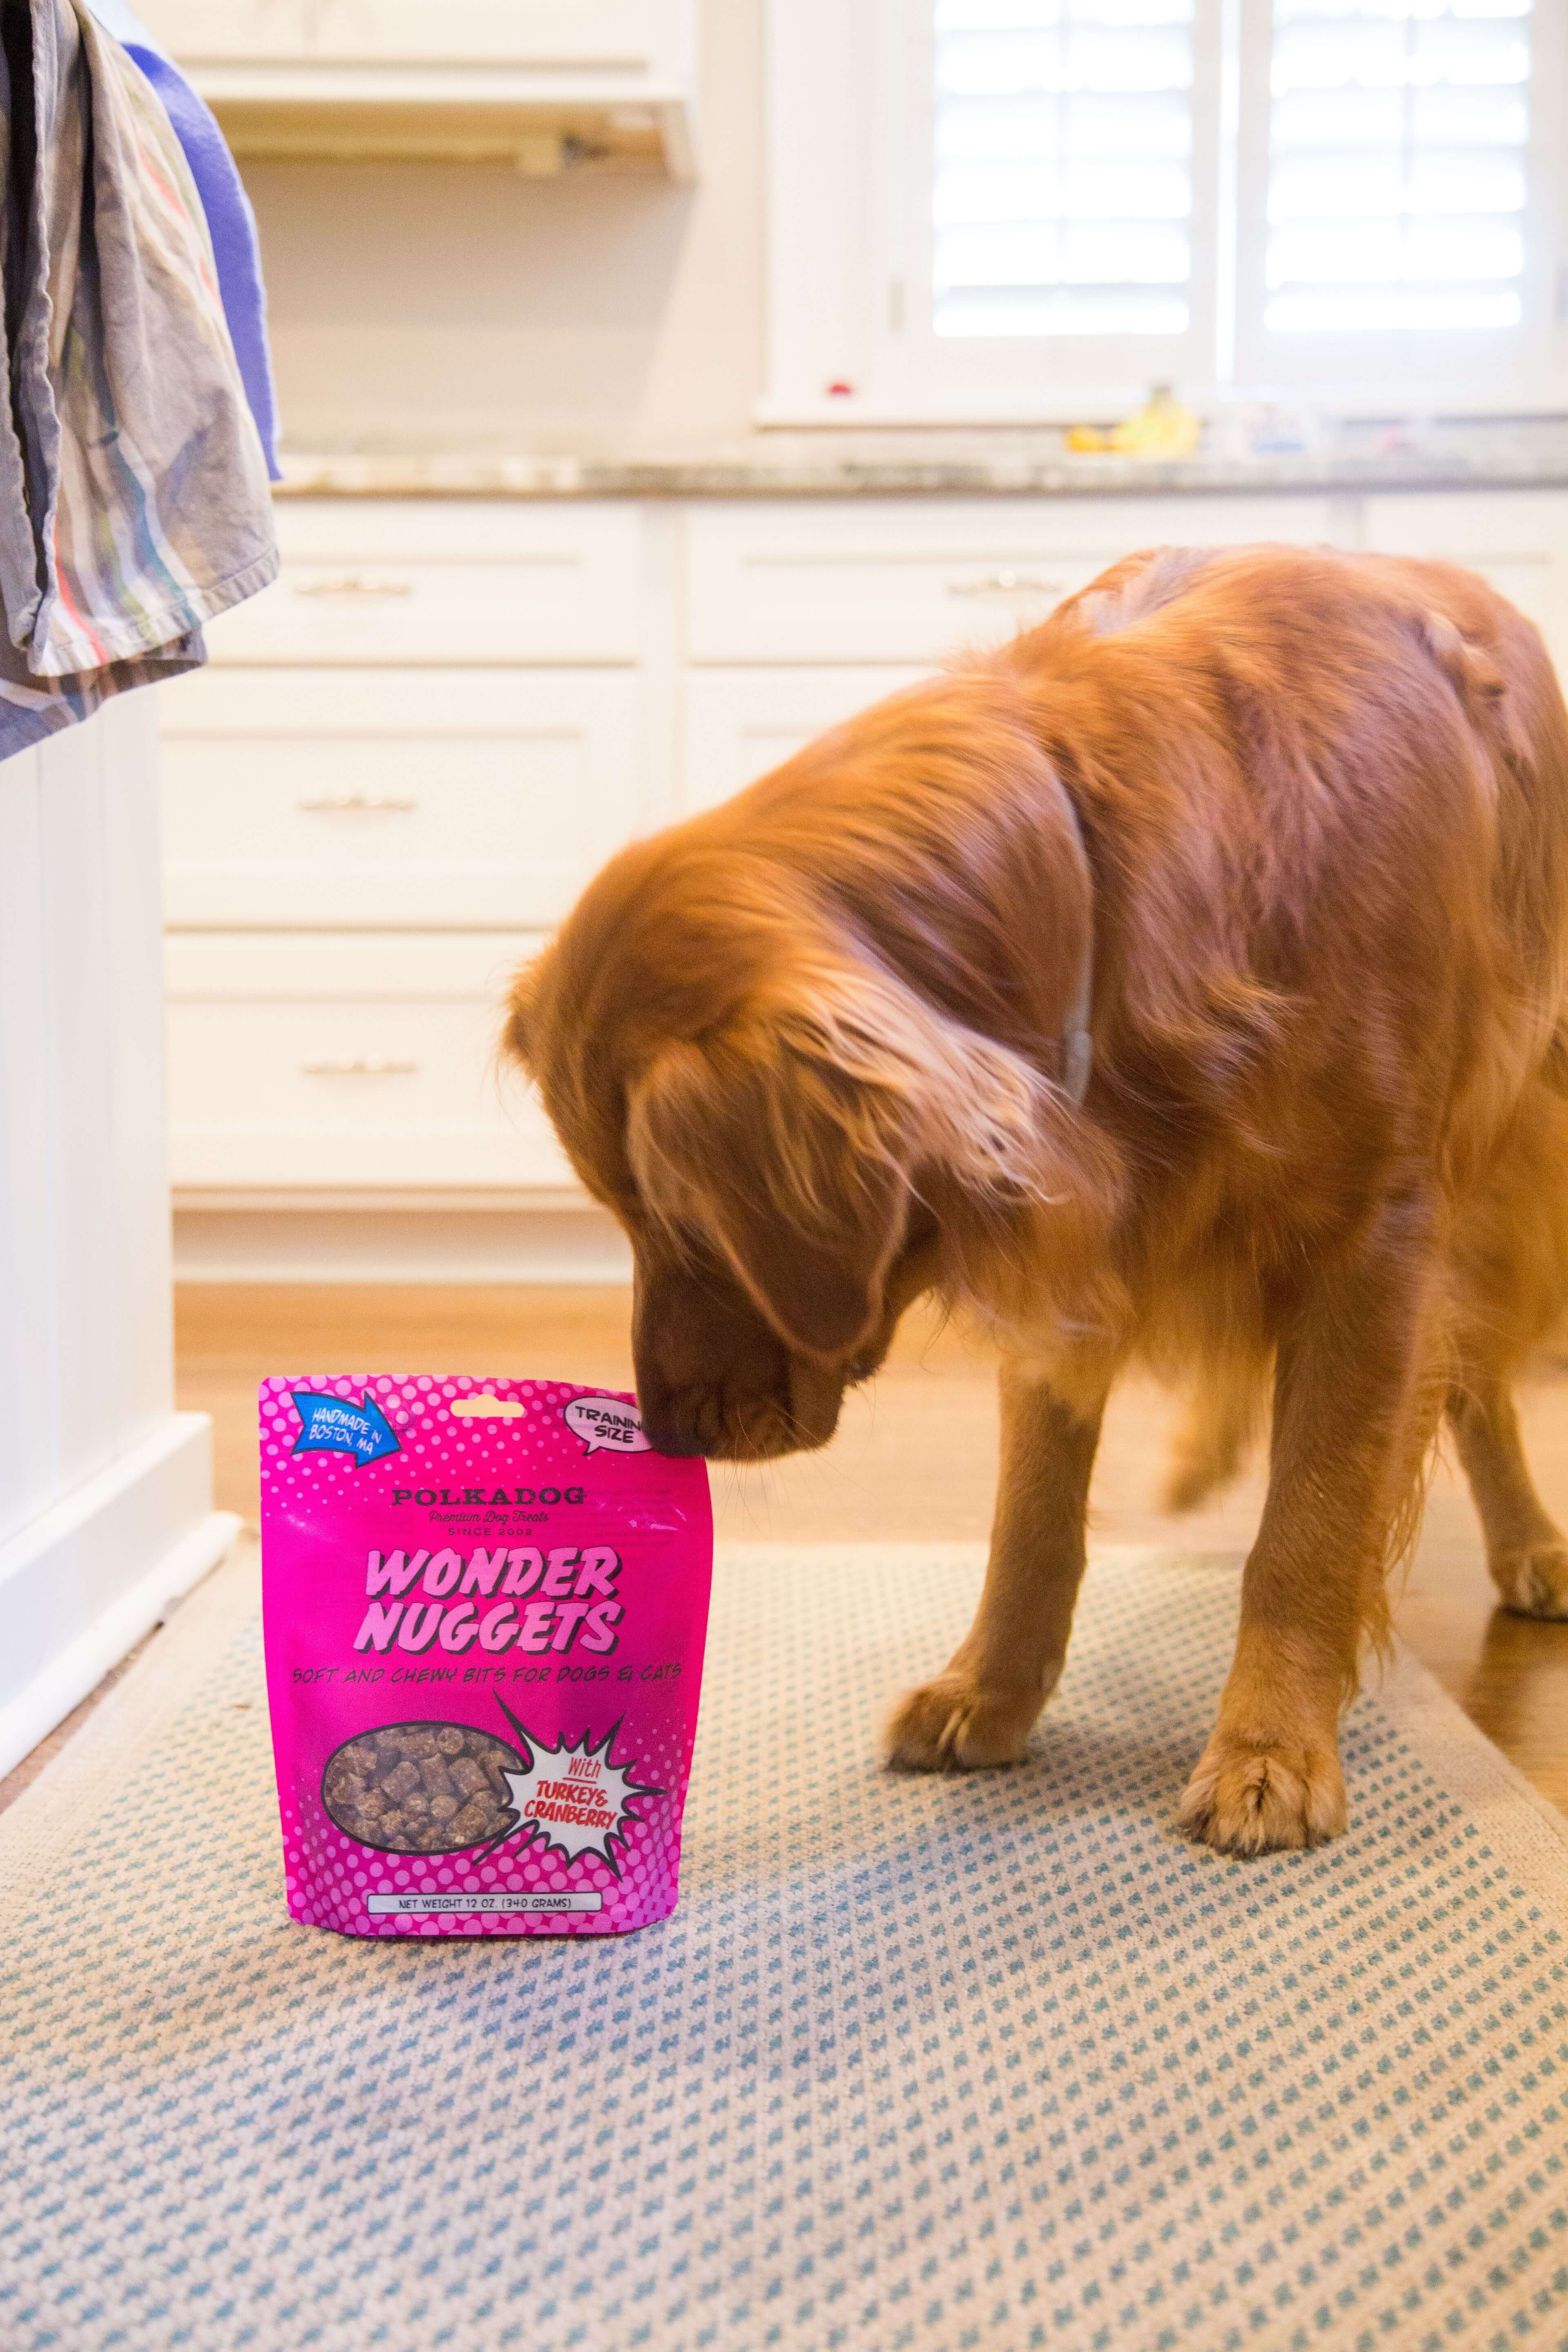 Dog posing next to winder nuggets